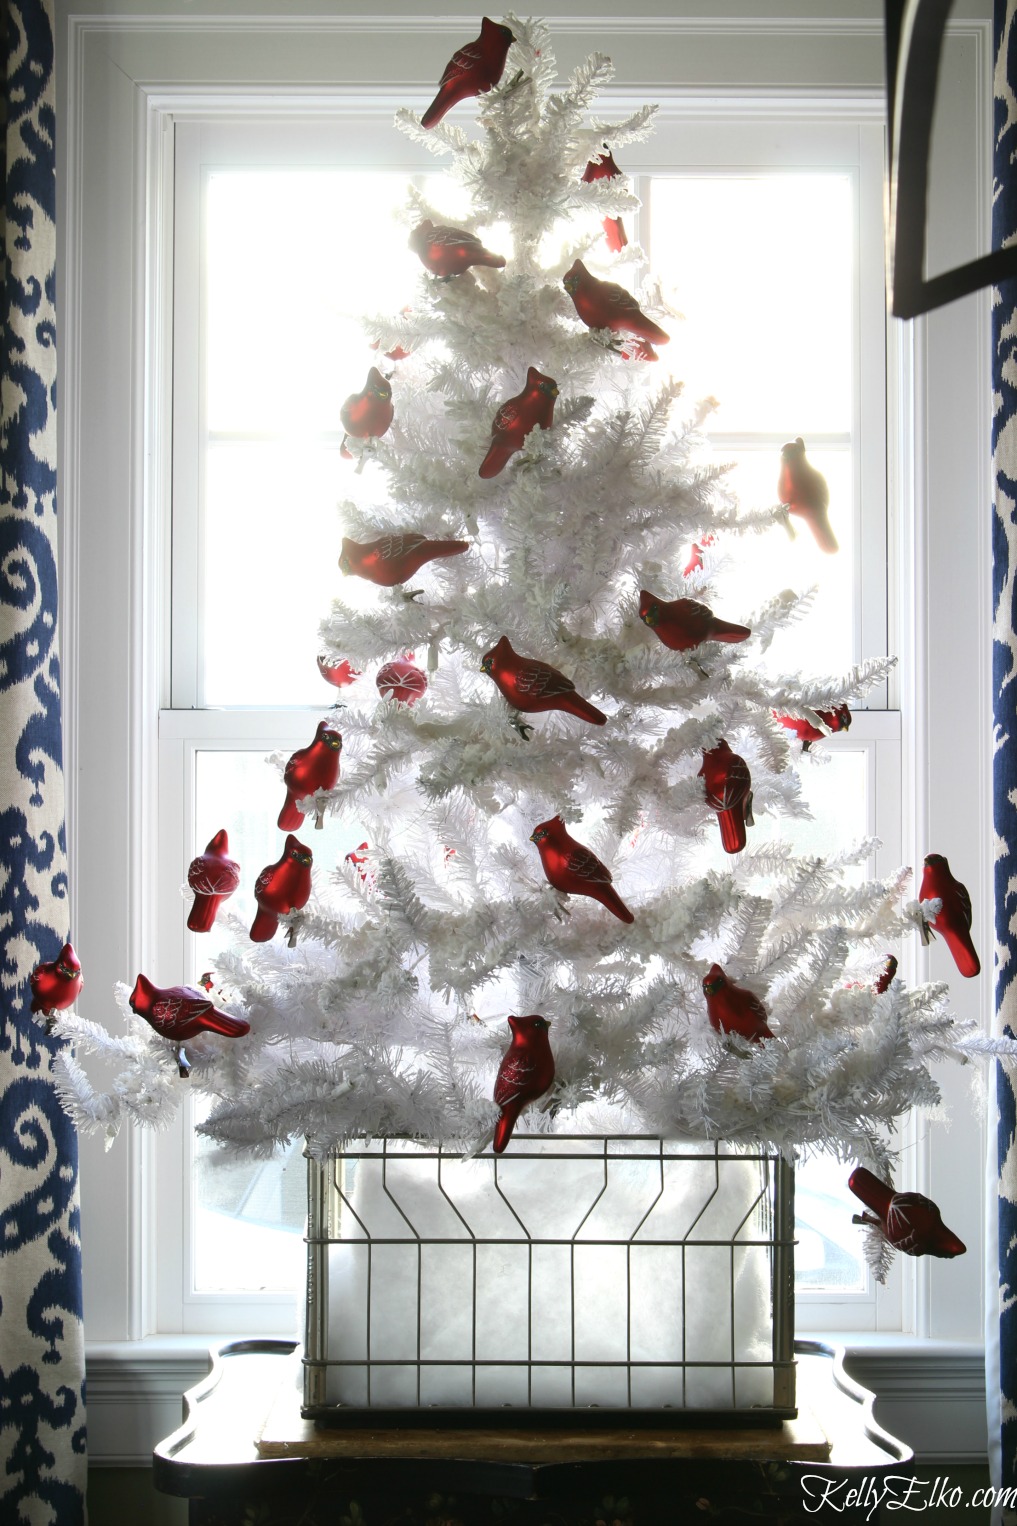 White Christmas tree filled with a flock of red cardinals kellyelko.com #christmastree #whitechristmastree #whitetree #vintagechristmas #christmasdecor #farmhousechristmas #kellyelko #cardinals 